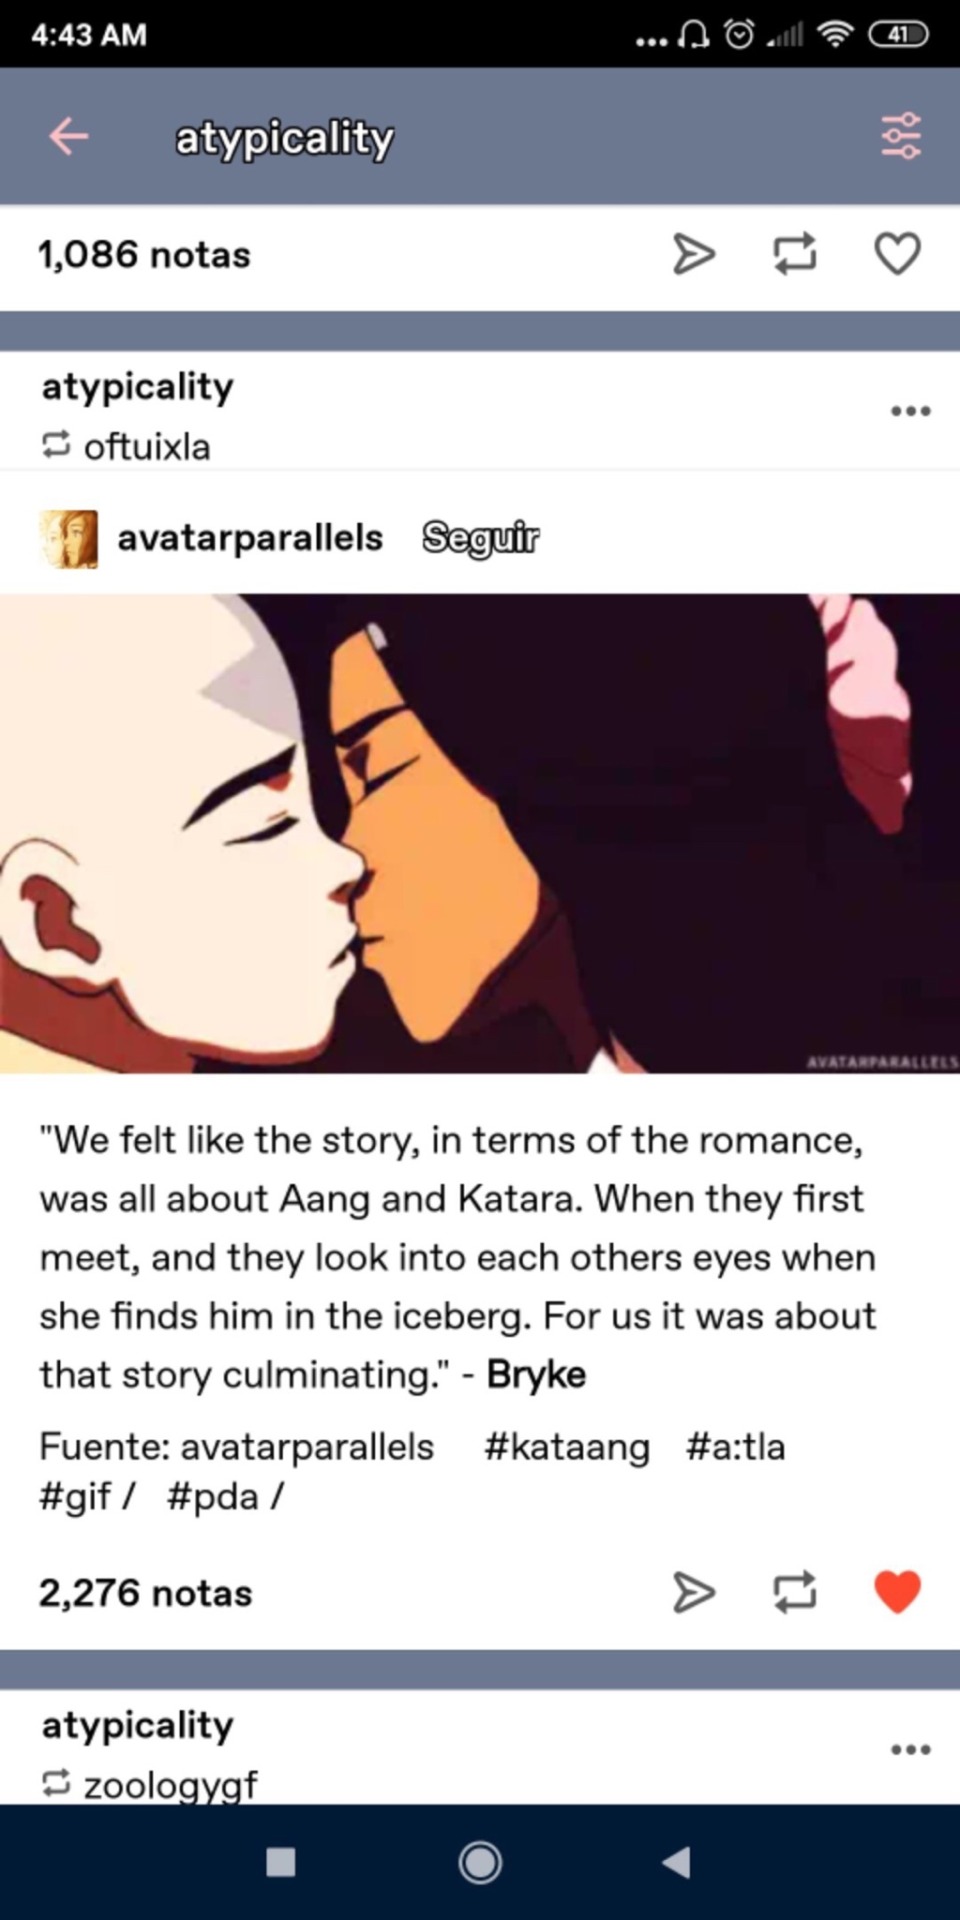 The audience felt the story culminating as they experience the romance being all about Aang along with Katara.